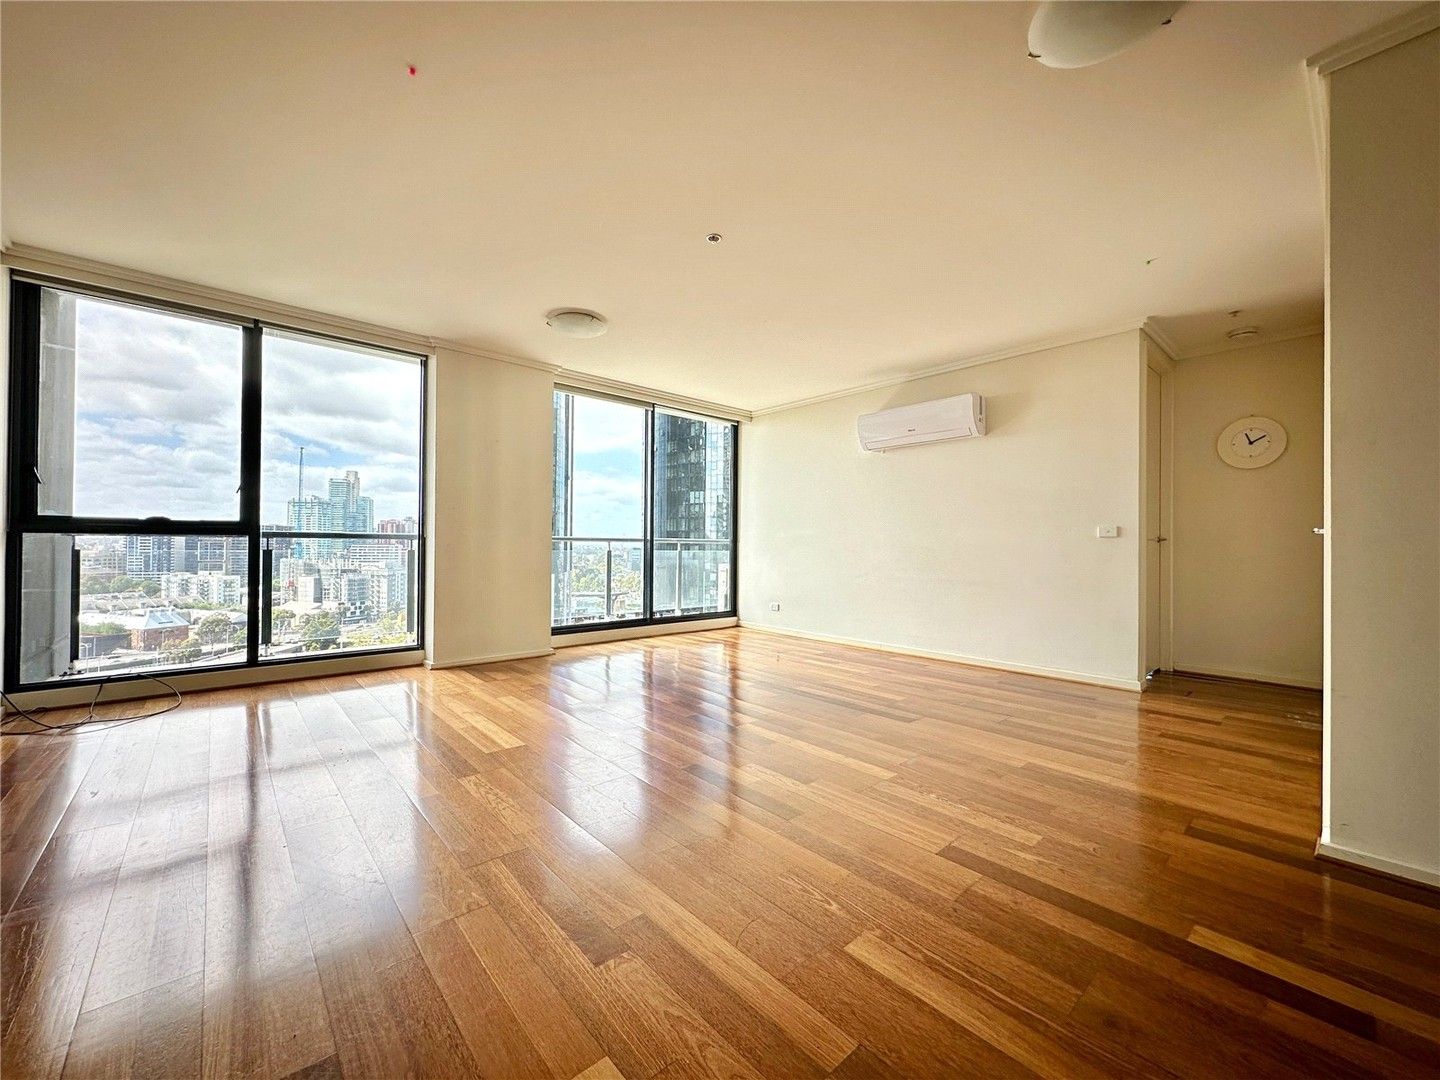 2 bedrooms Apartment / Unit / Flat in 177/88 Kavanagh Street SOUTHBANK VIC, 3006